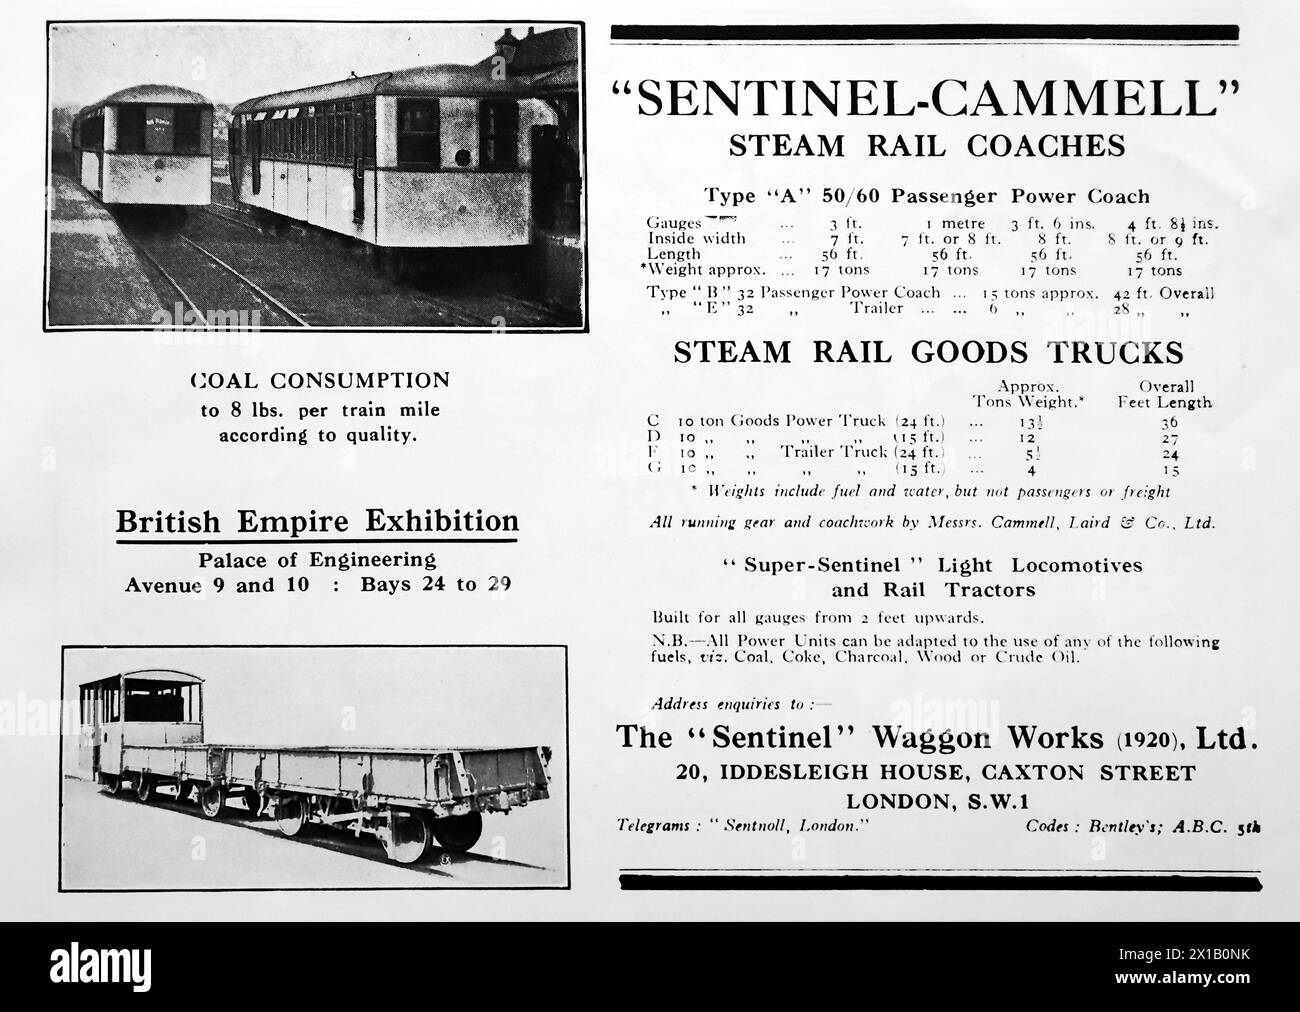 Advertisement for Sentinel-Cammell steam rail coaches and goods trucks. The Sentinel Waggon Works (1920) Ltd, was based in Caxton Street, London and could be seen in the Palace of Engineering at the British Empire Exhibition. From an original publication dated 15 May 1924, this helps to give an insight into public transport, and the railways in particular, of the 1920s. Stock Photo